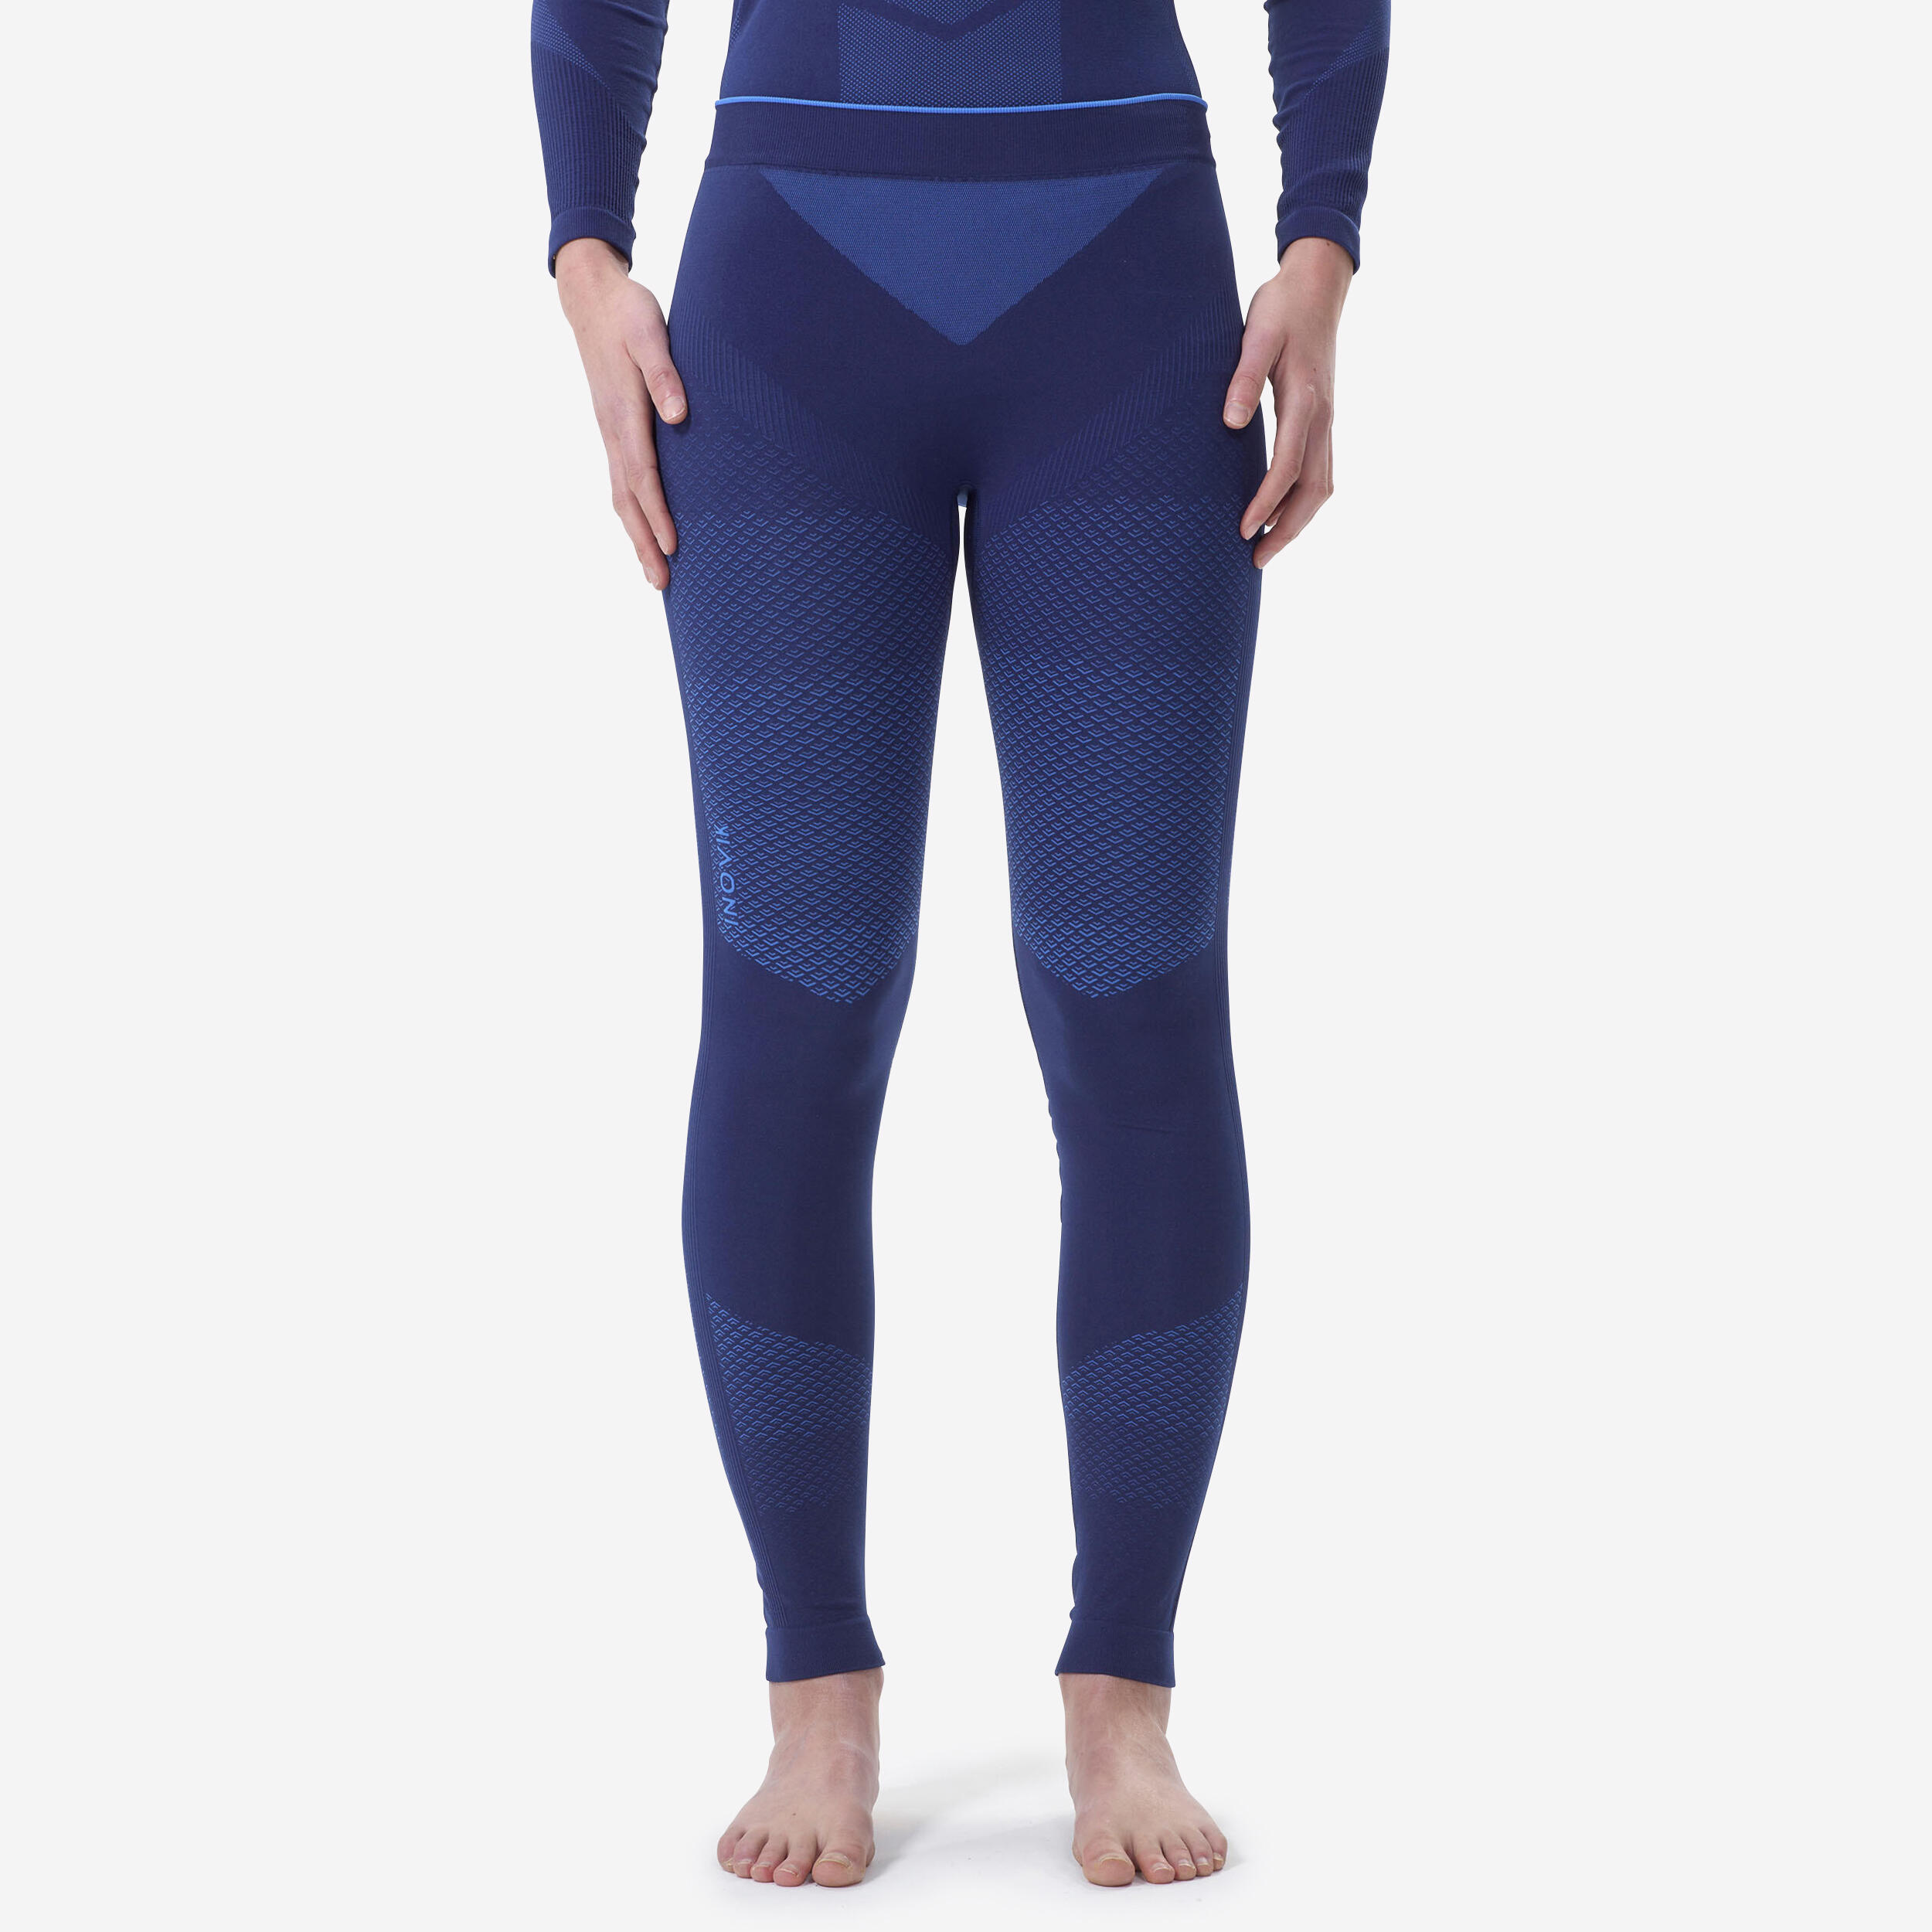 Women’s Cross-Country Skiing Base Layer Bottoms - 900 Blue